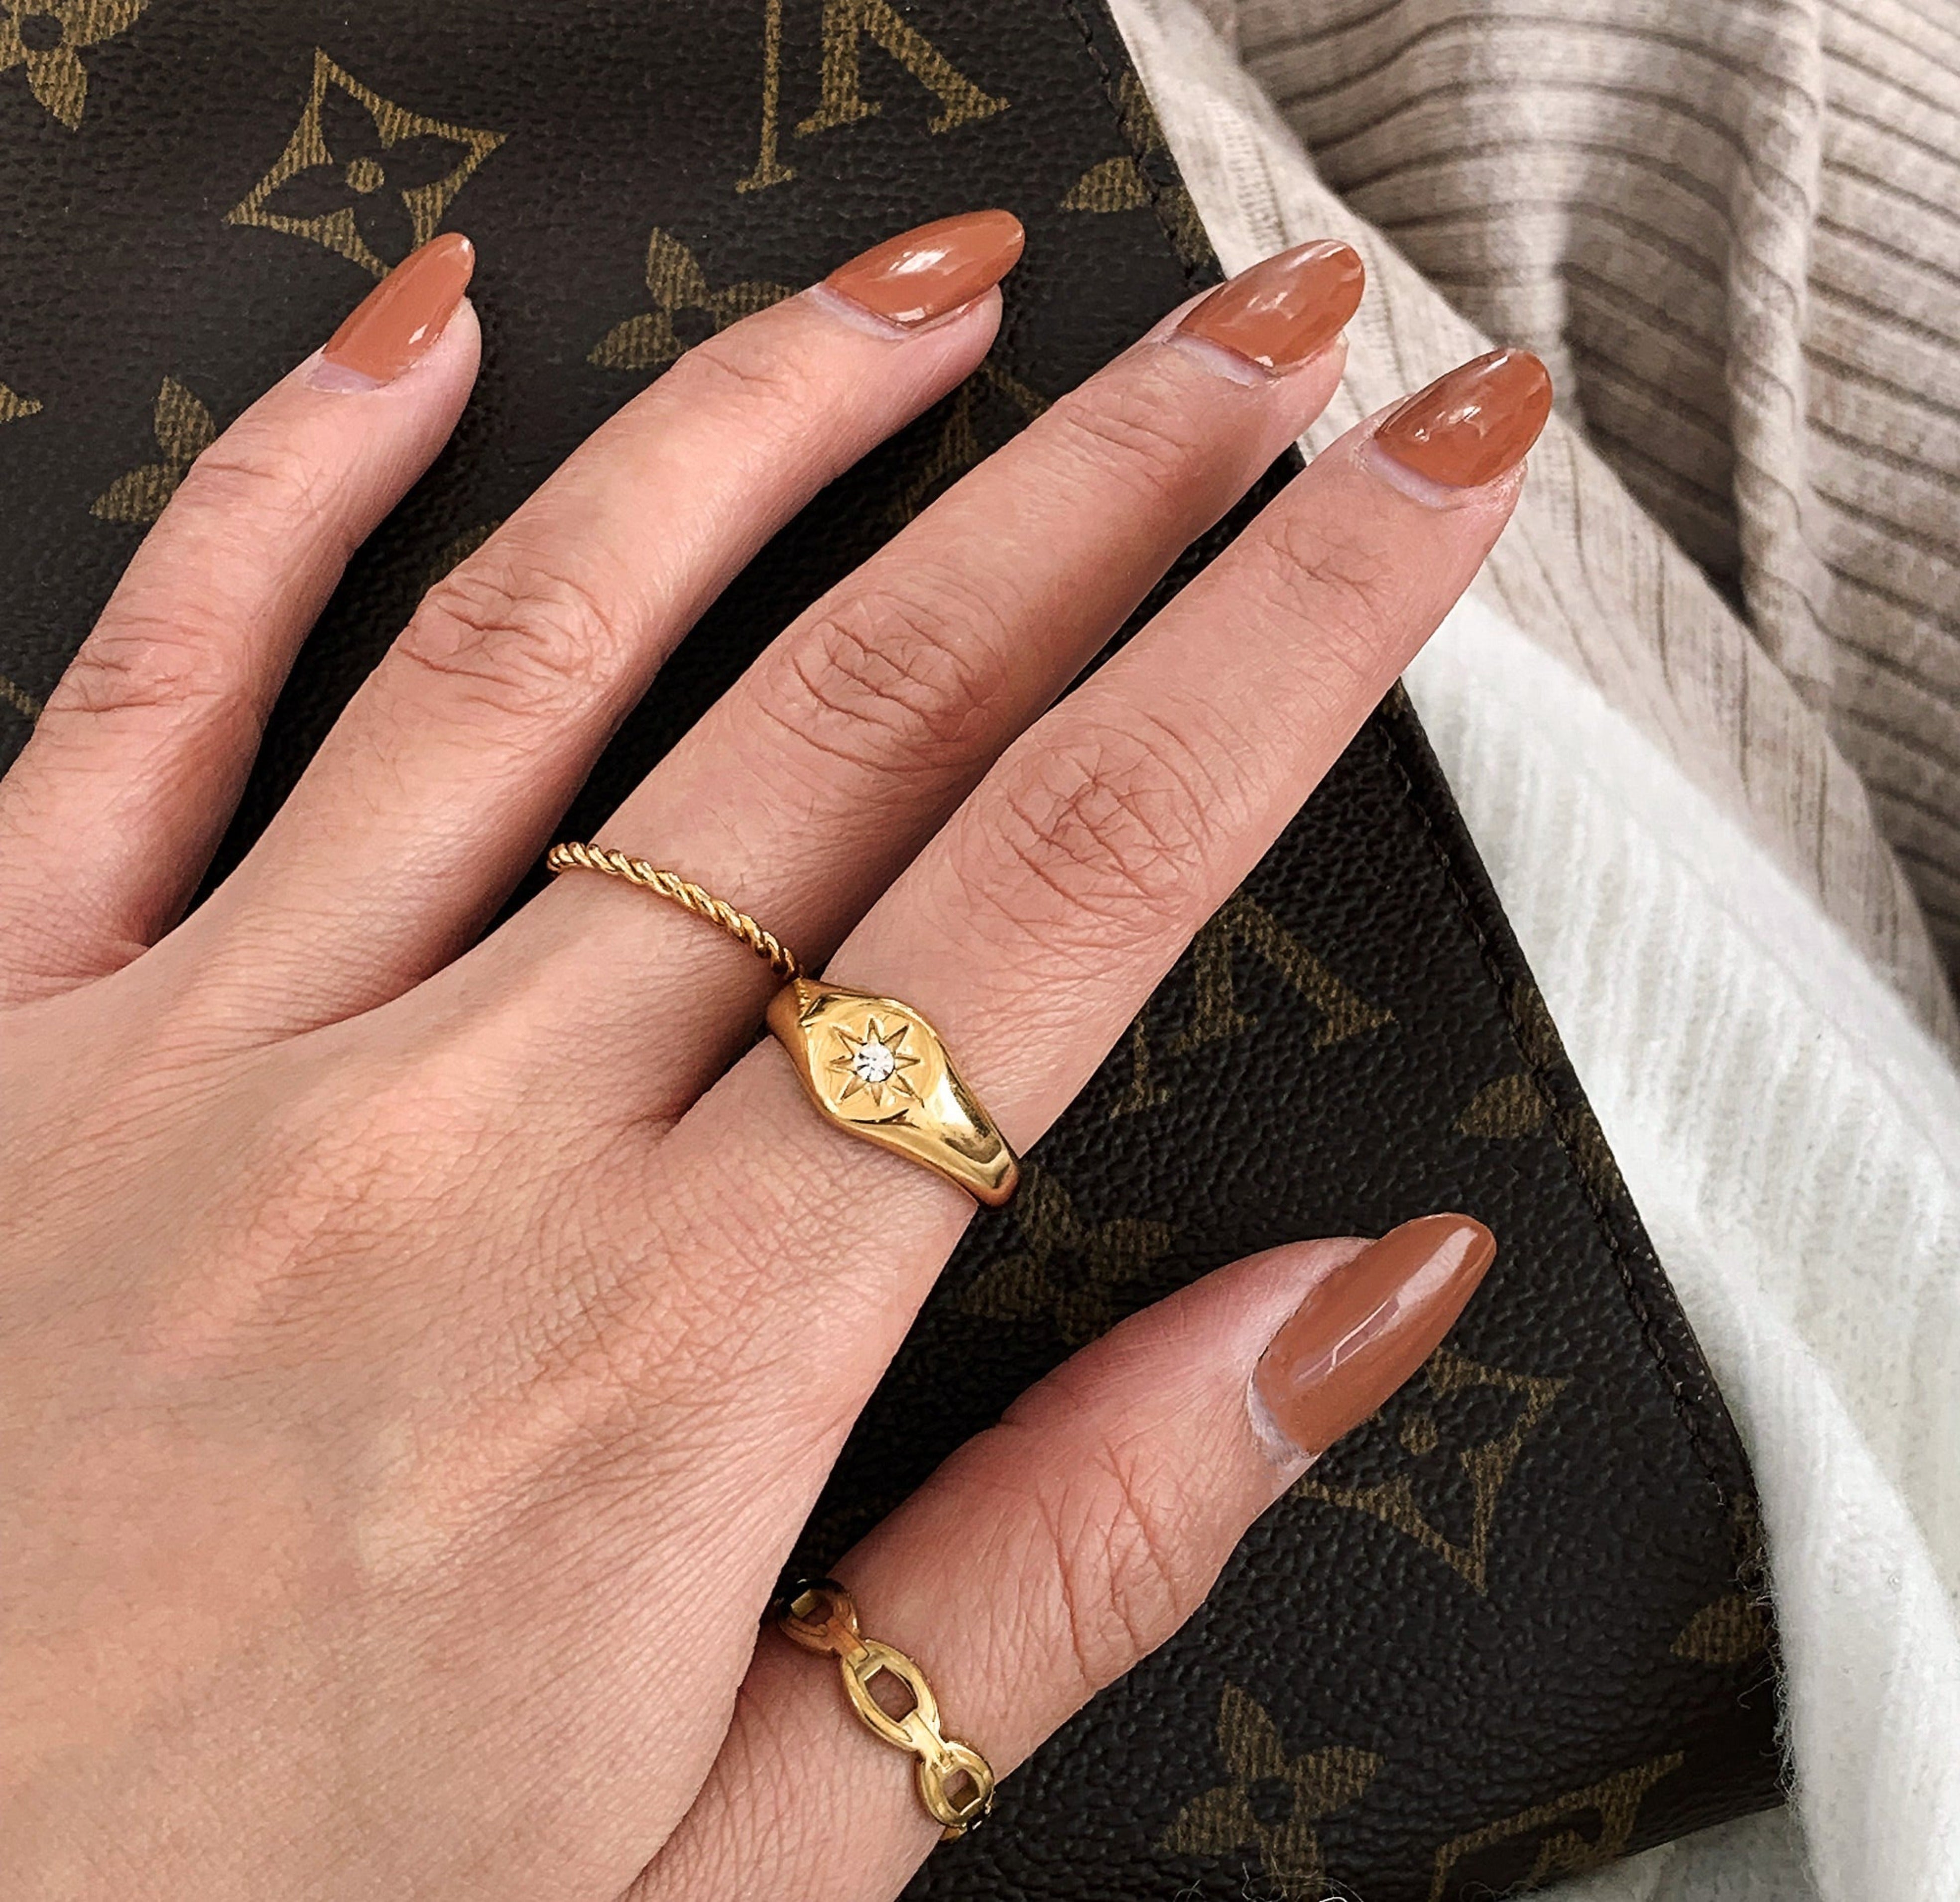 gold starburst signet ring worn on hand model stacked with the  gold dainty Sophie twist ring  and the Dylan gold chain ring worn on the thumb